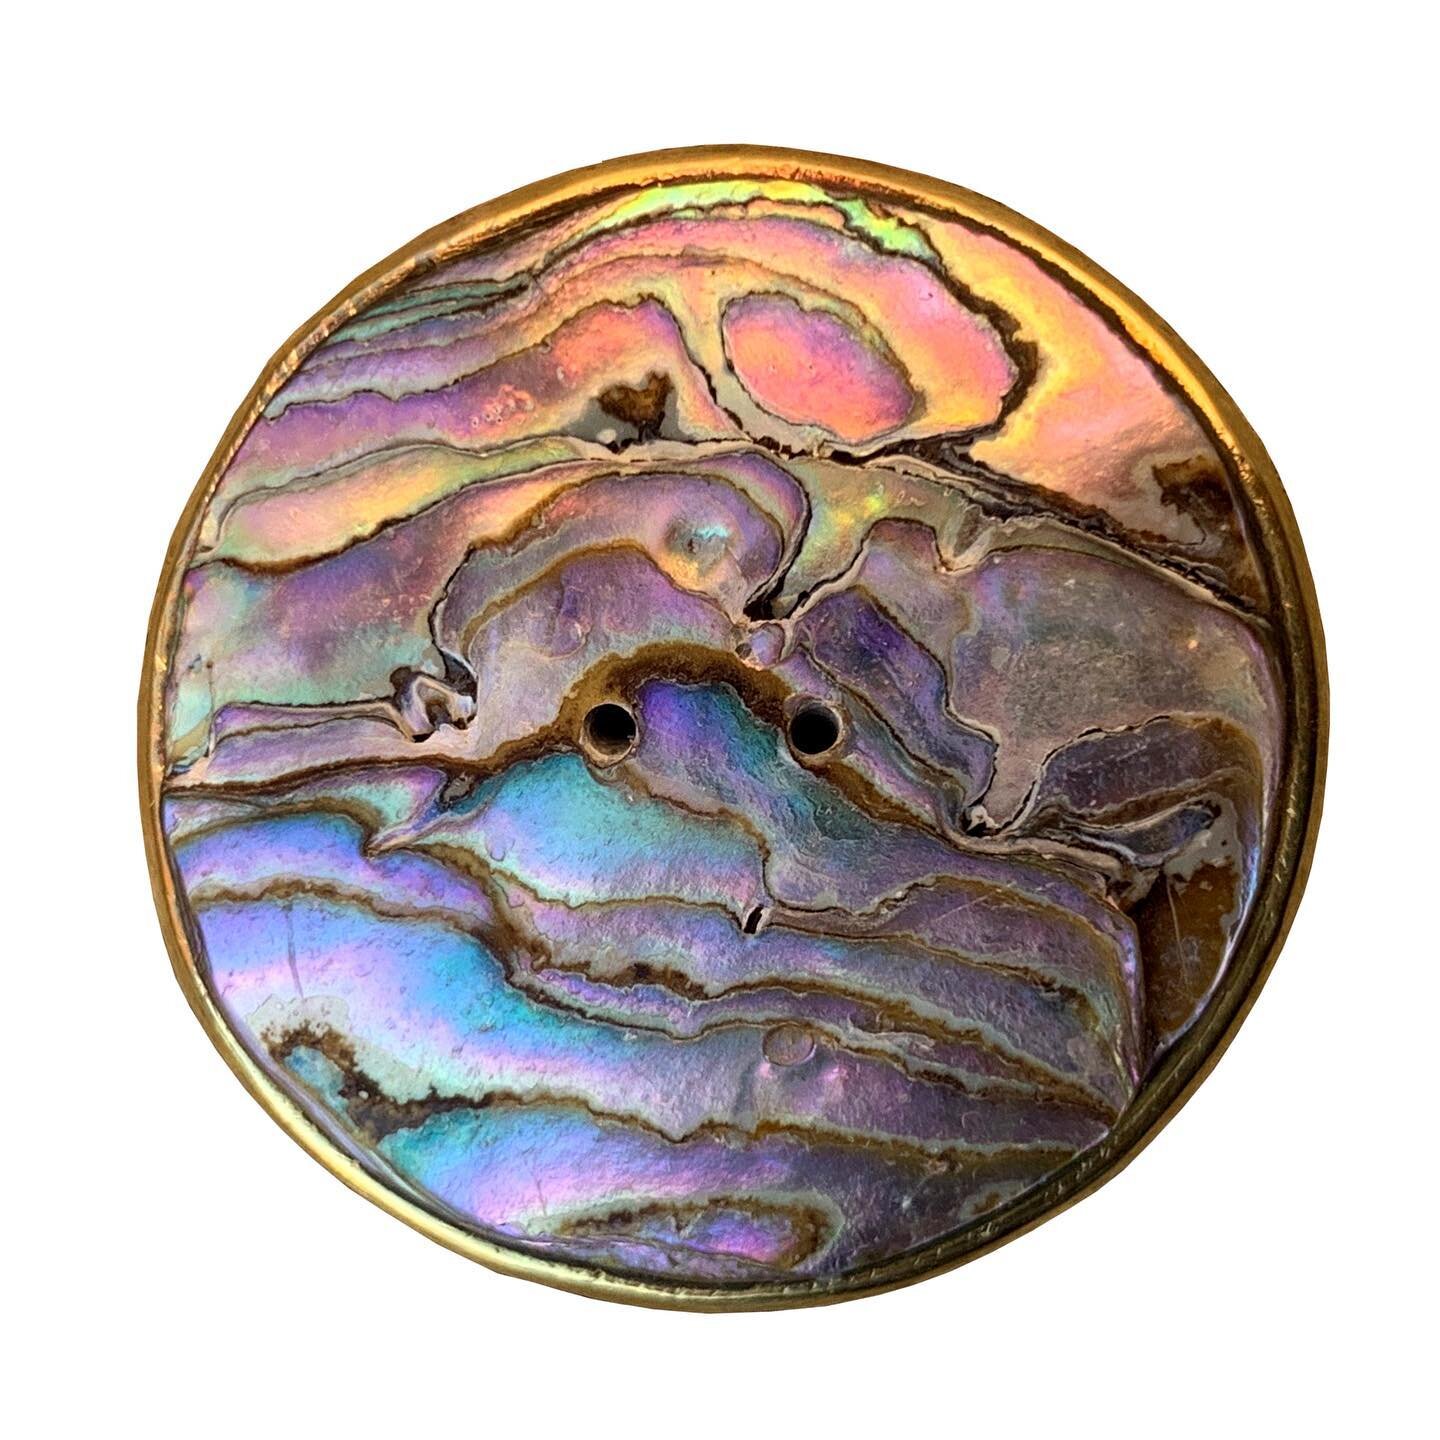 Big abalone and brass button. Reminds me of a sunset over the ocean.